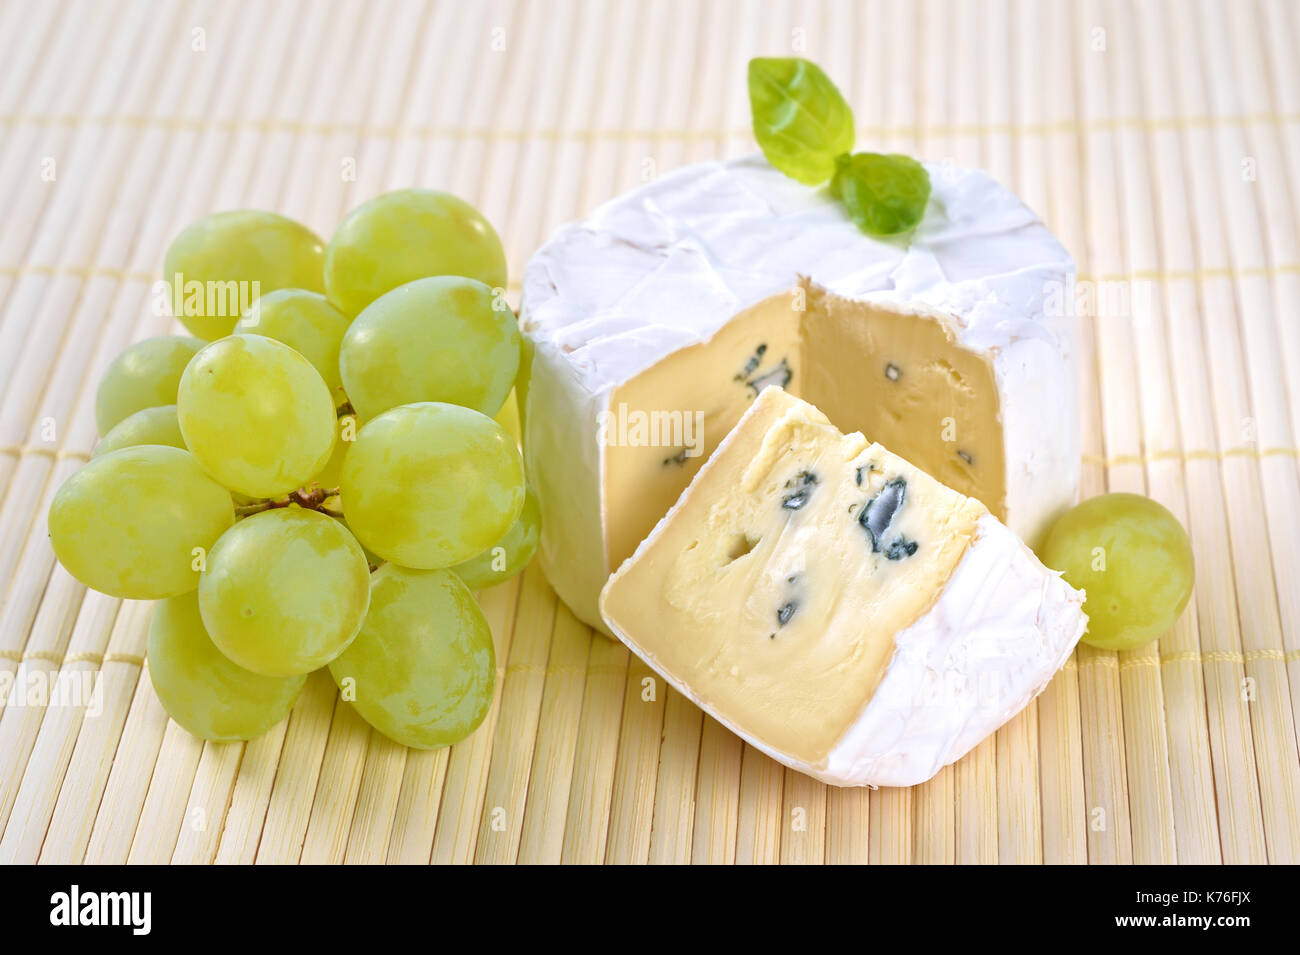 French Camembert soft cheese with grapes and marjorjam on an wooden placemat Stock Photo